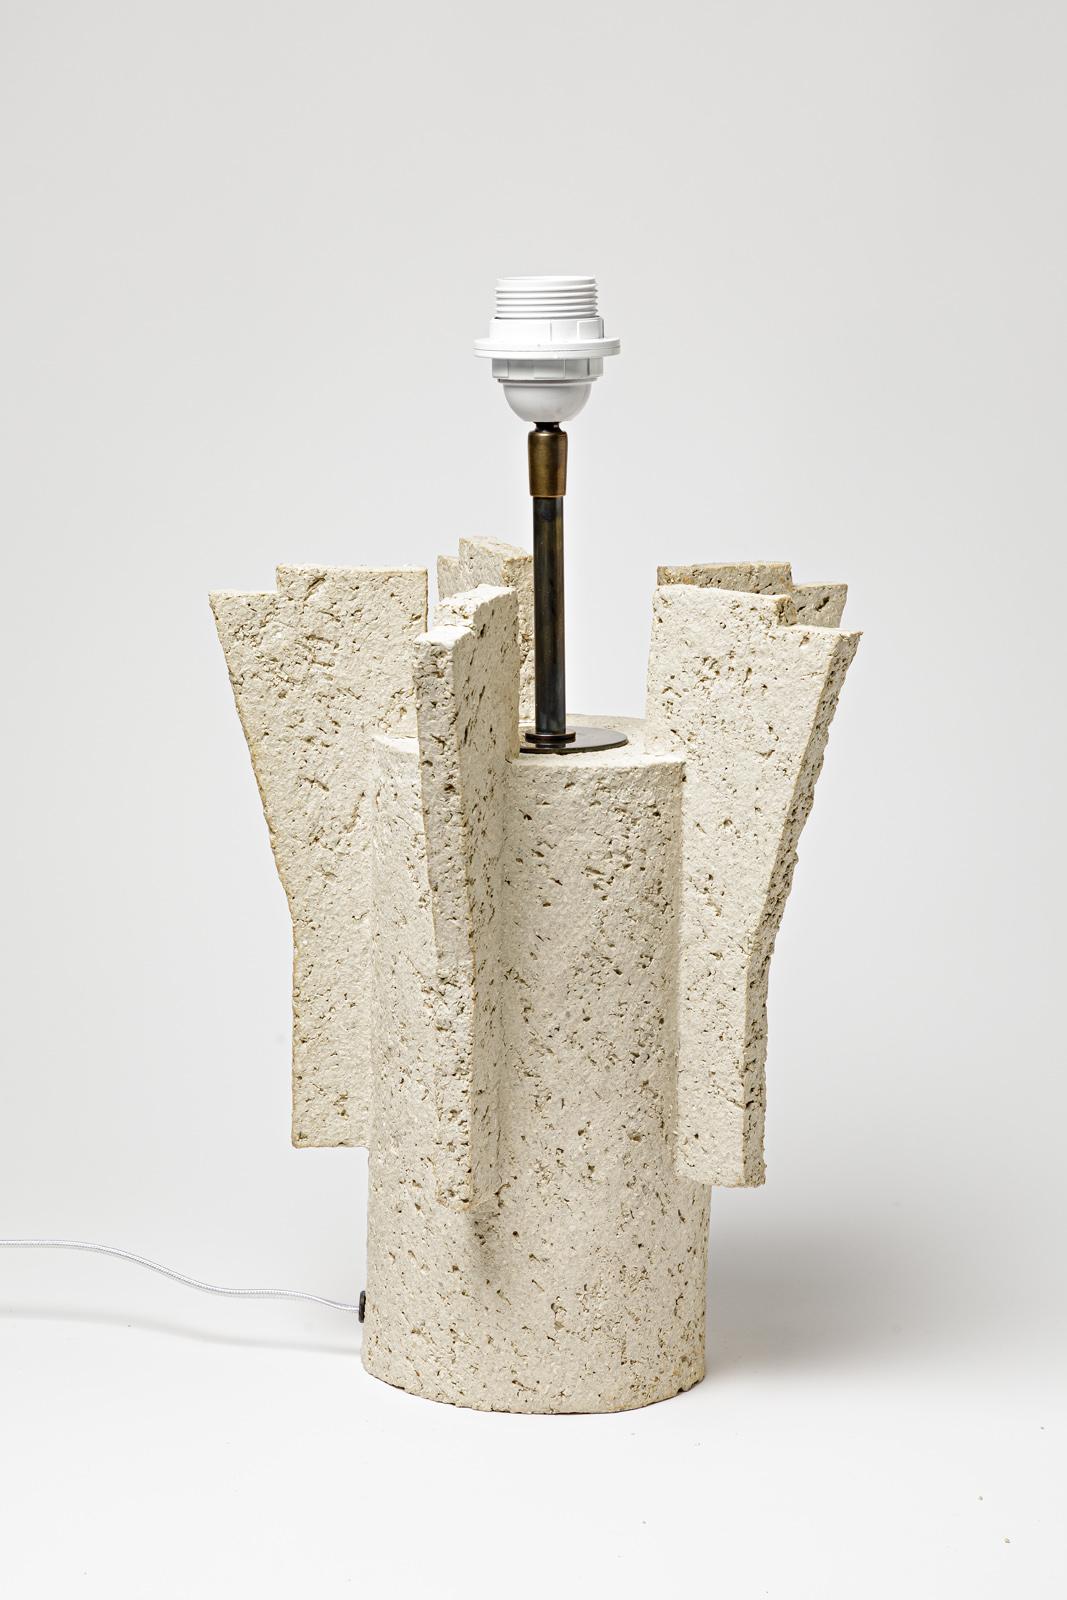 Table lamp in beige grog clay by Denis Castaing.
Artist signature under the base. 2019.
H : 12.6’ x 10.2’ inches (ceramic only).
H : 17.5’ x 10.2’ inches (with electrical system).
Sold with a European electrical system.